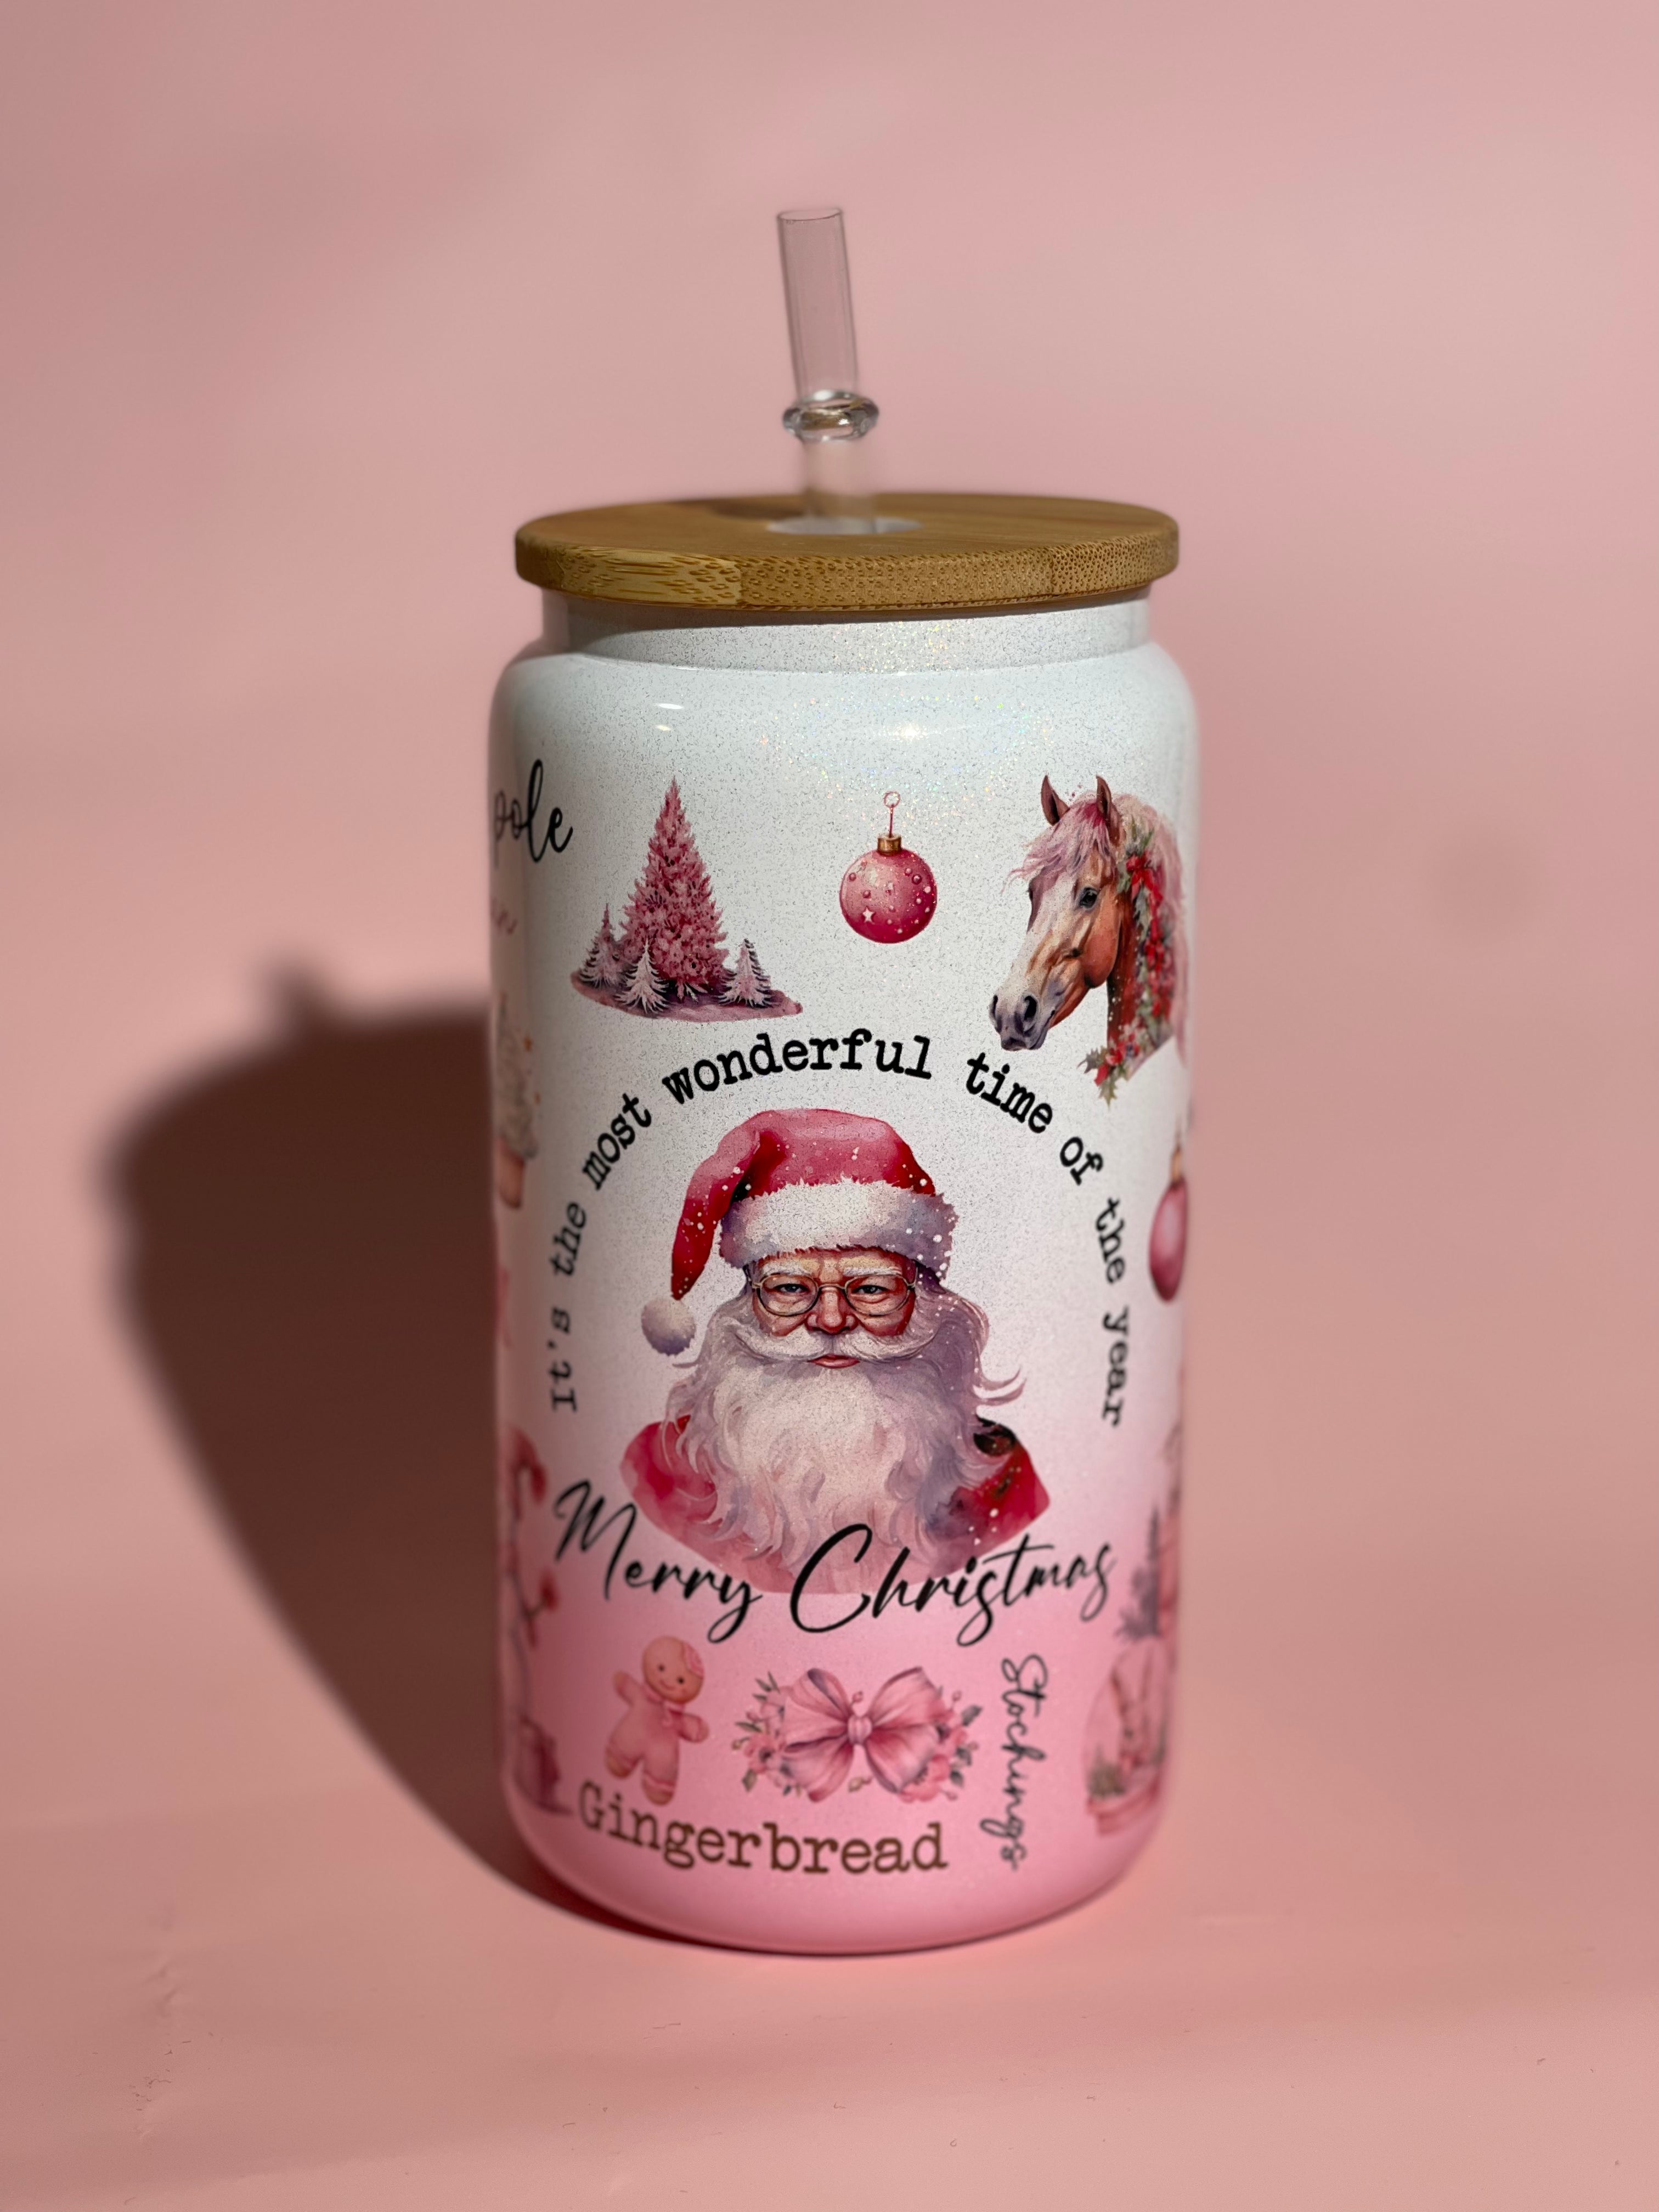 Merry Christmas Cup